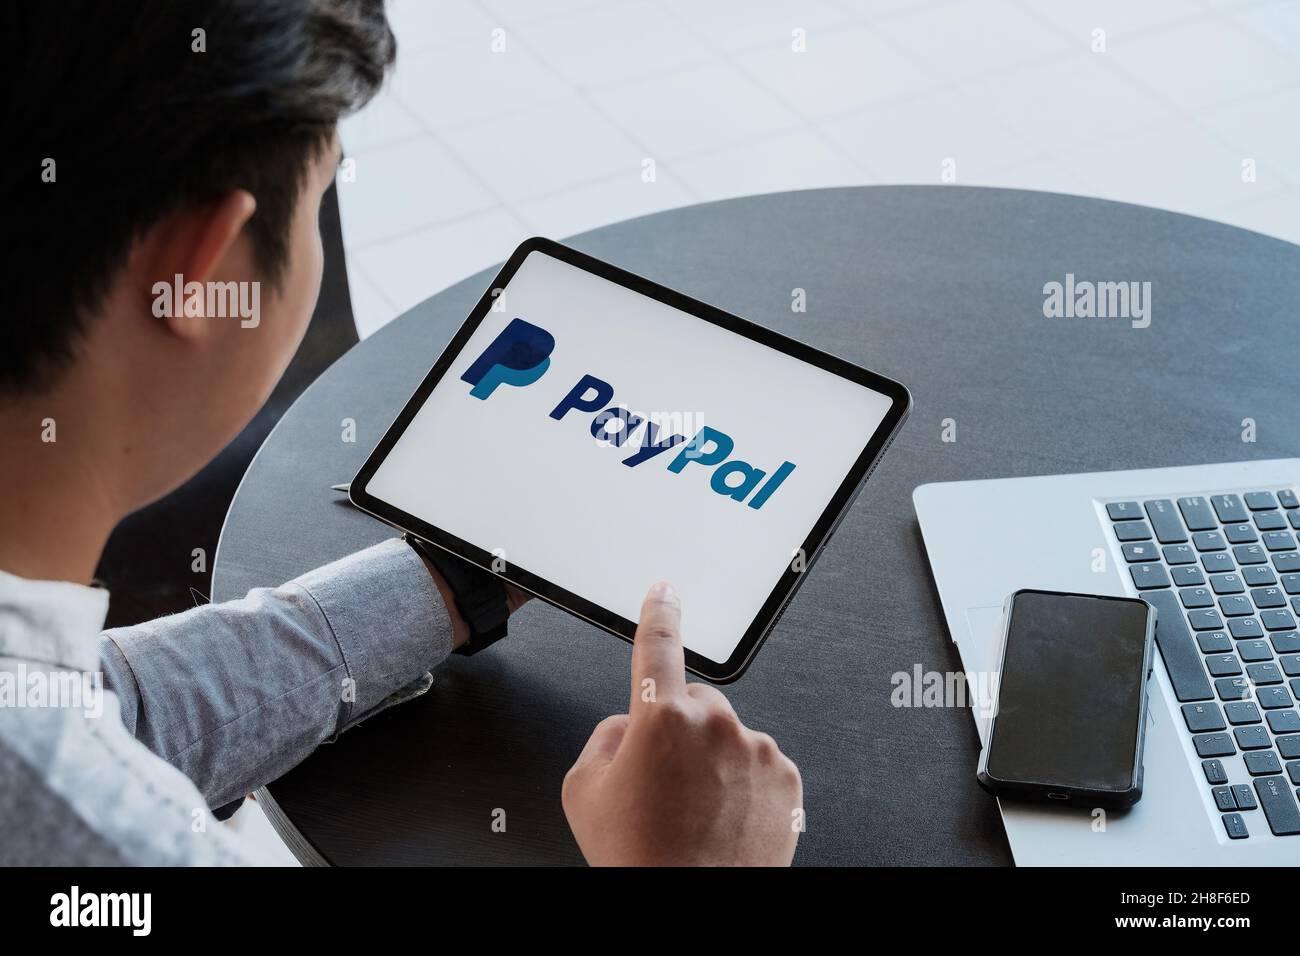 CHIANG MAI, THAILAND - NOV 28, 2021: Man holding a iPad with service PayPal on the screen Stock Photo